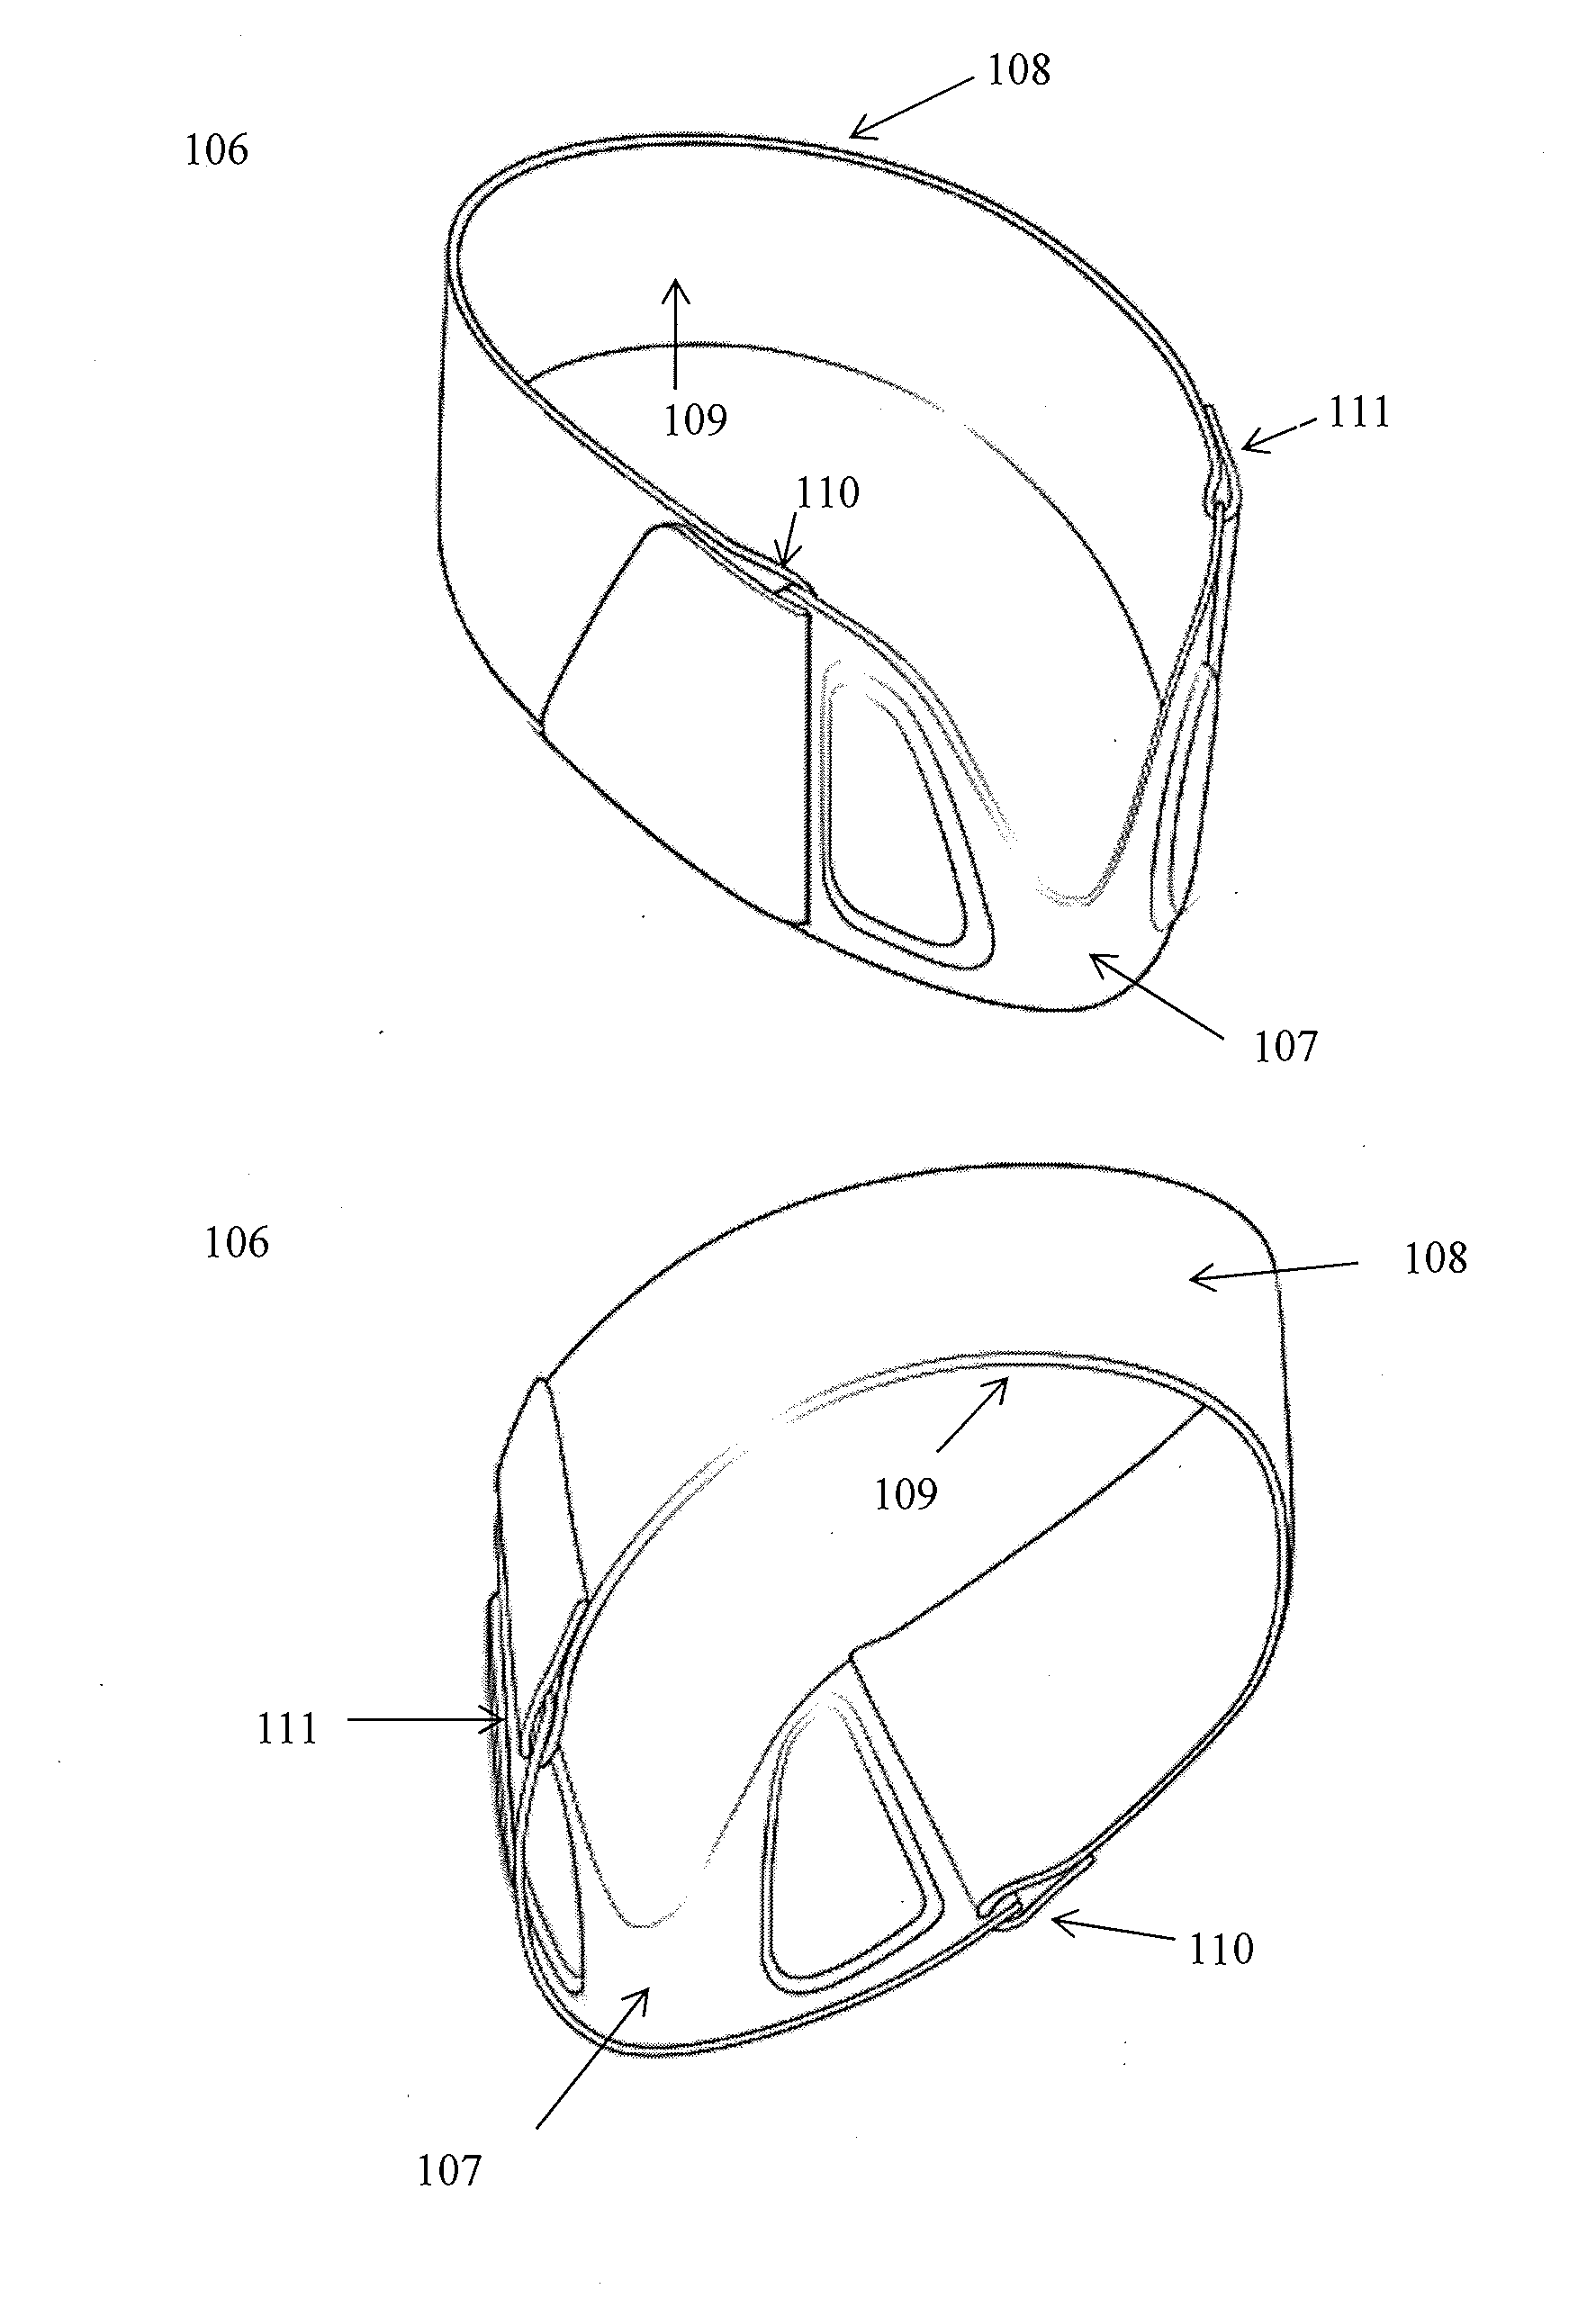 Methods and devices to reduce the likelihood of injury from concussive or blast forces